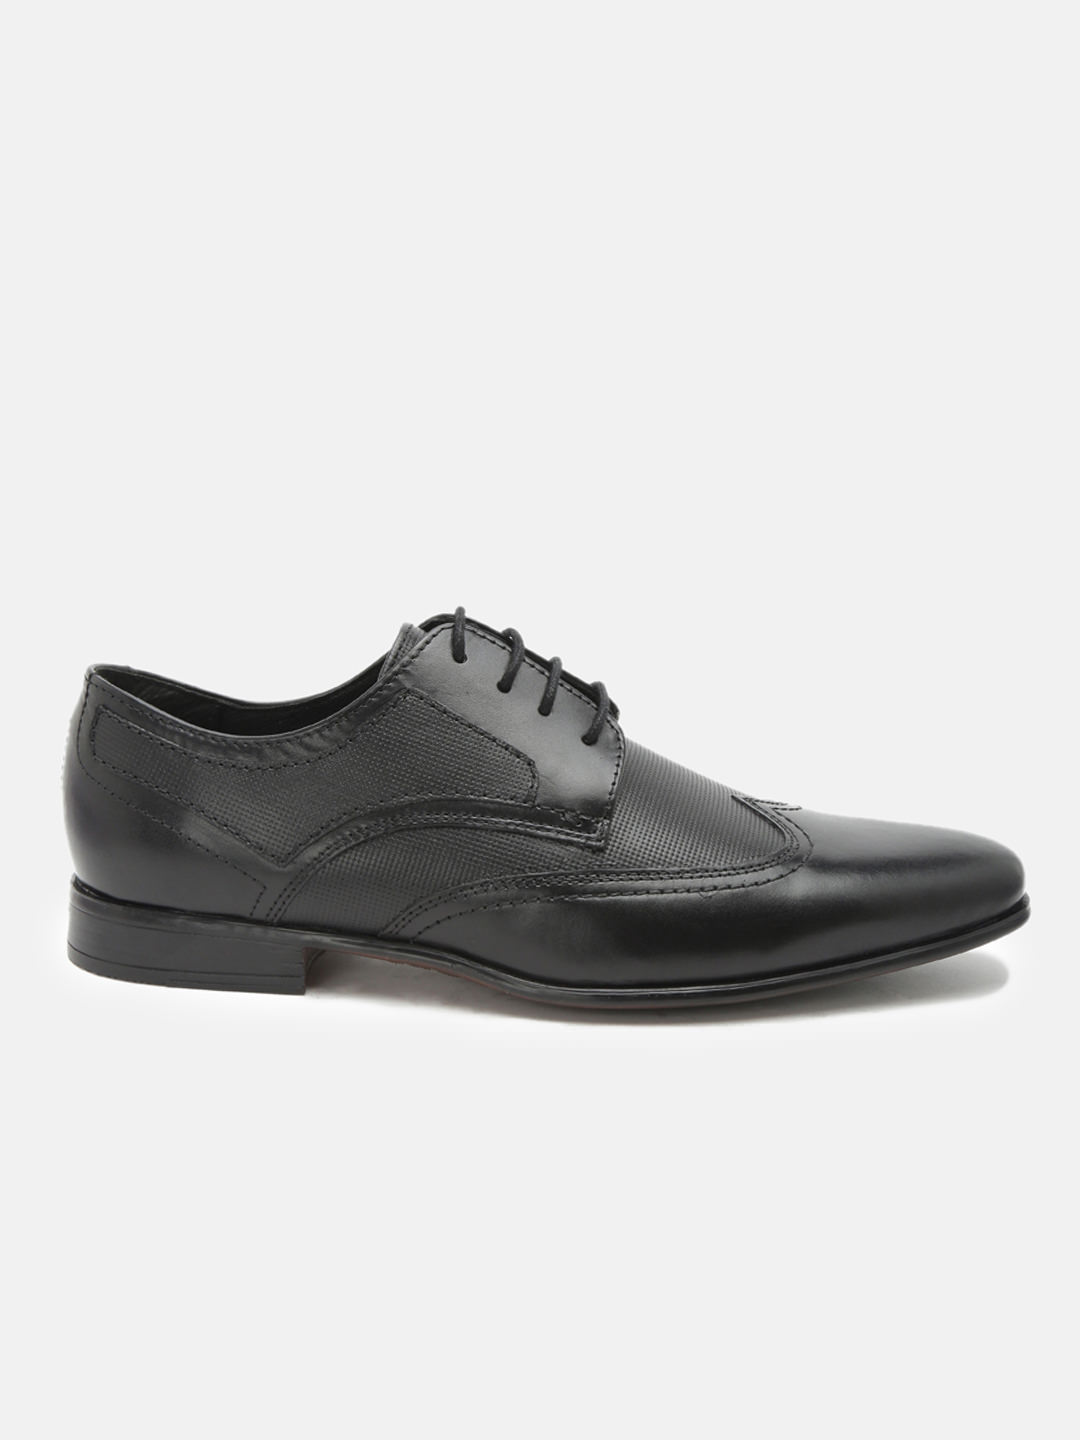 Best Leather Black Derby Shoes with Wingtip Toe Cap